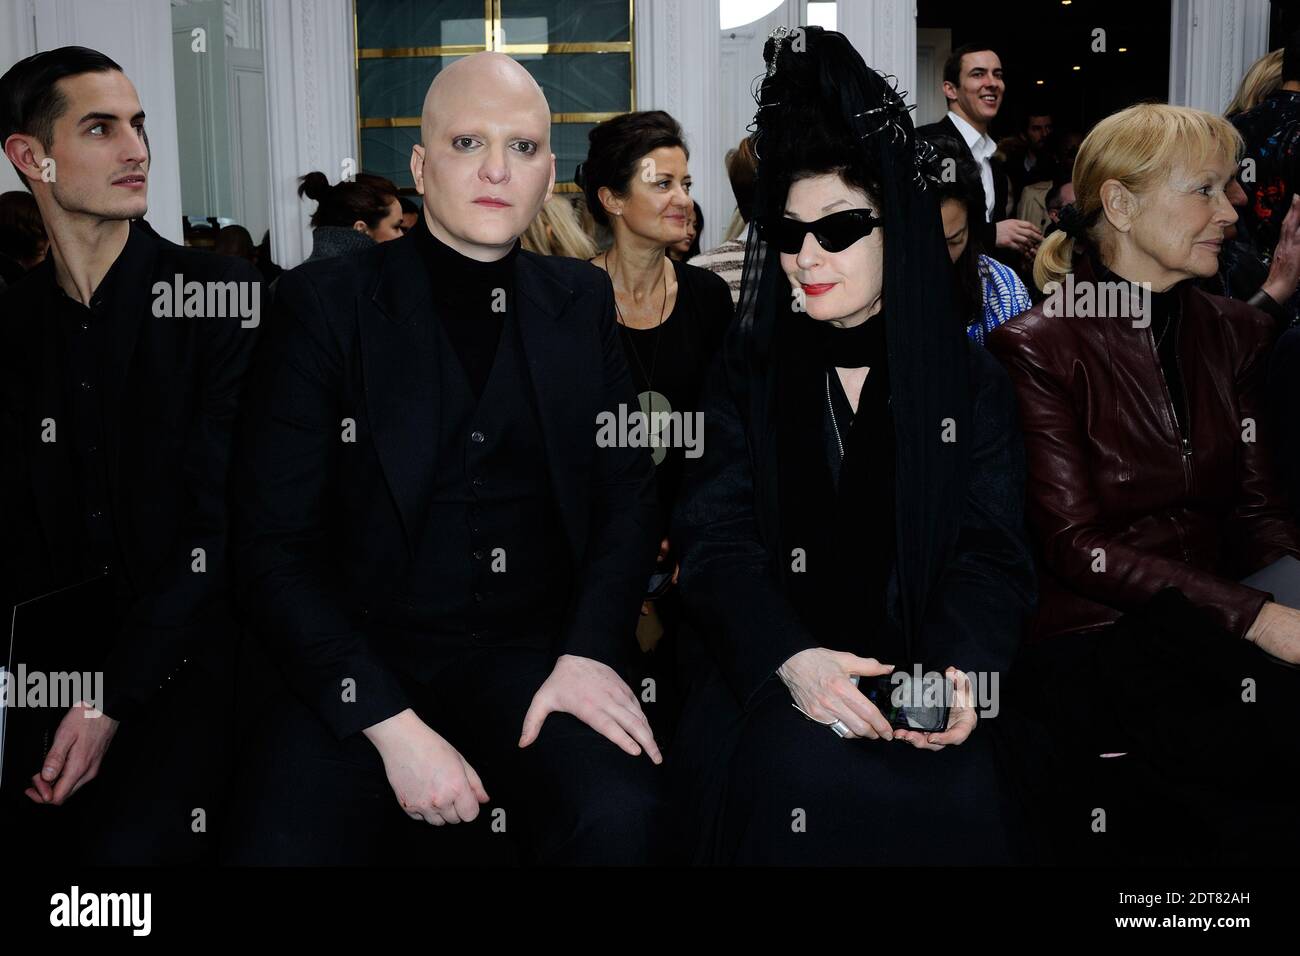 Ali Mahdavi and Diane Pernet attending Jean-Claude Jitrois's Fall-Winter 2014/2015 Ready-To-Wear collection show held at the designer's headquarters in Paris, France on March 01, 2014. Photo by Aurore Marechal/ABACAPRESS.COM Stock Photo